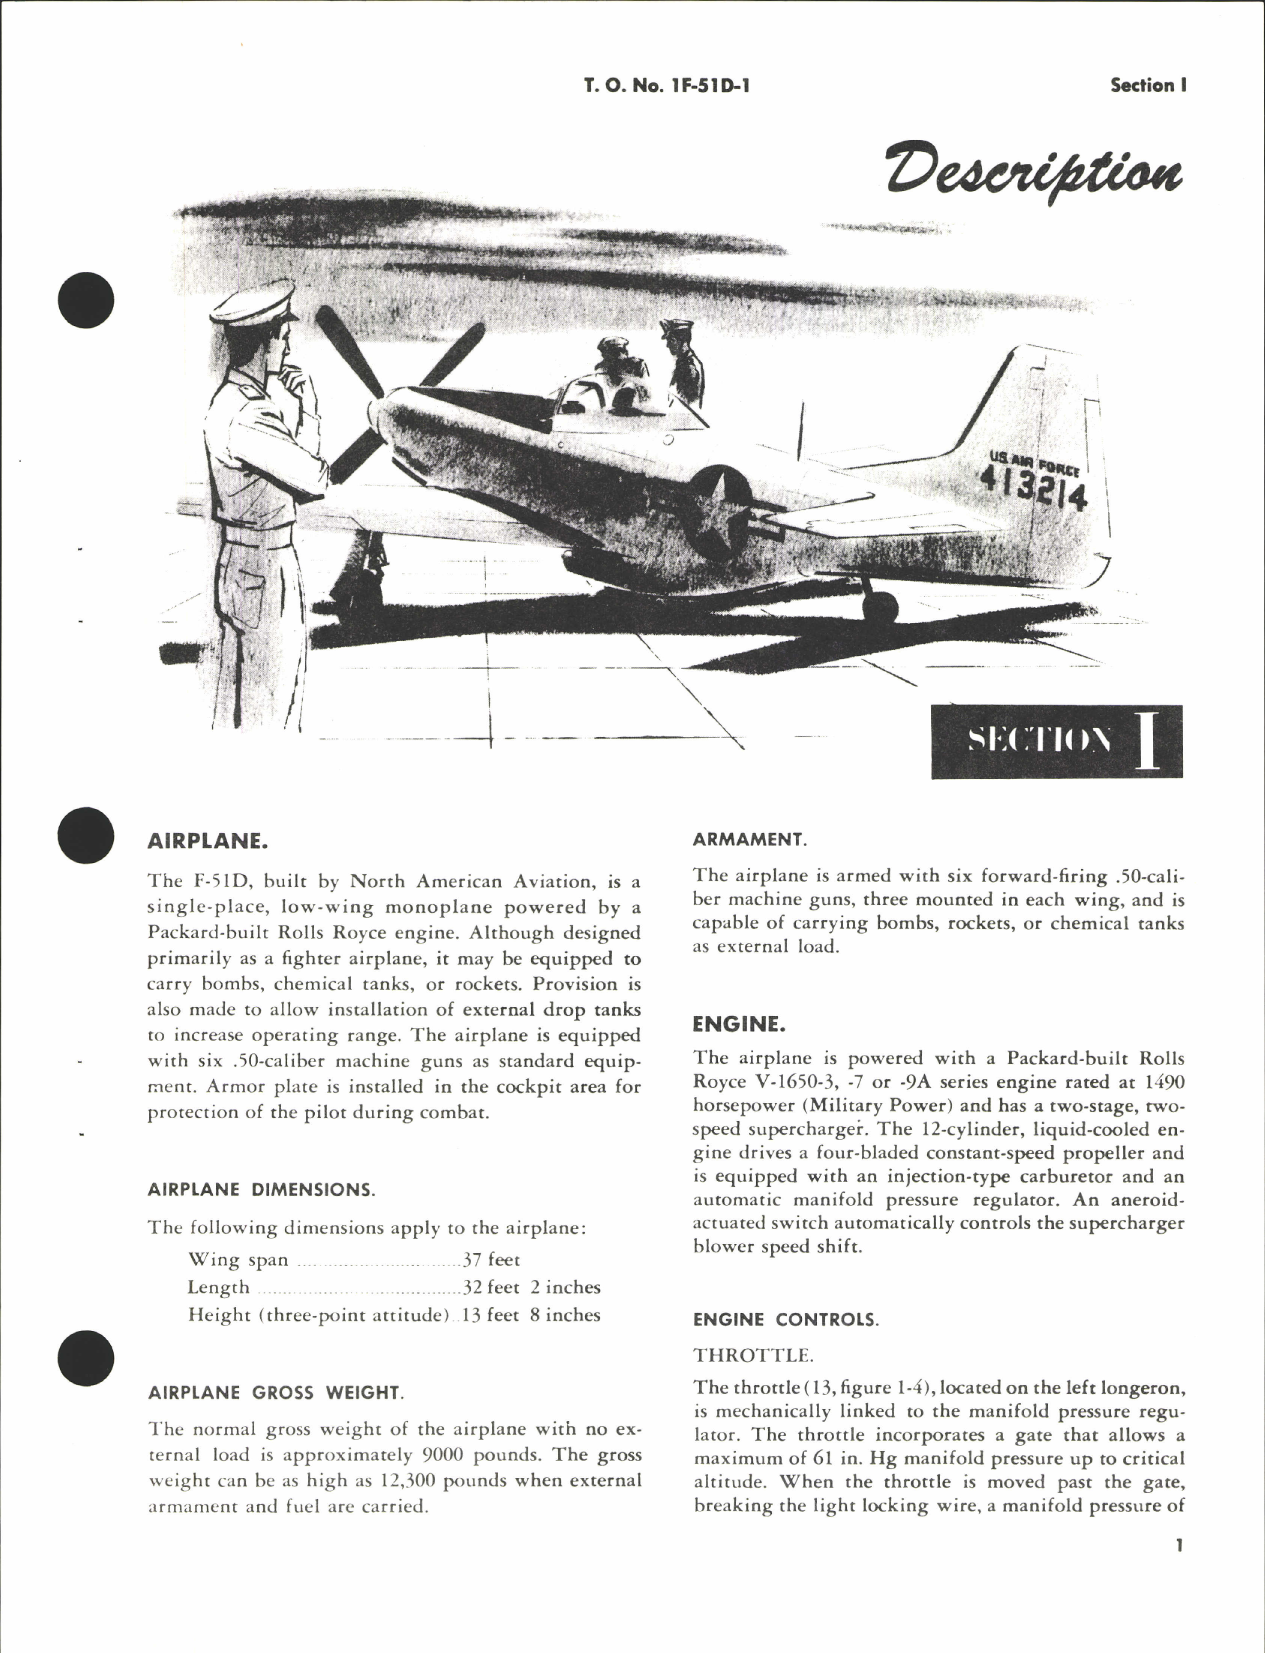 Sample page 7 from AirCorps Library document: Flight Handbook for F-51D